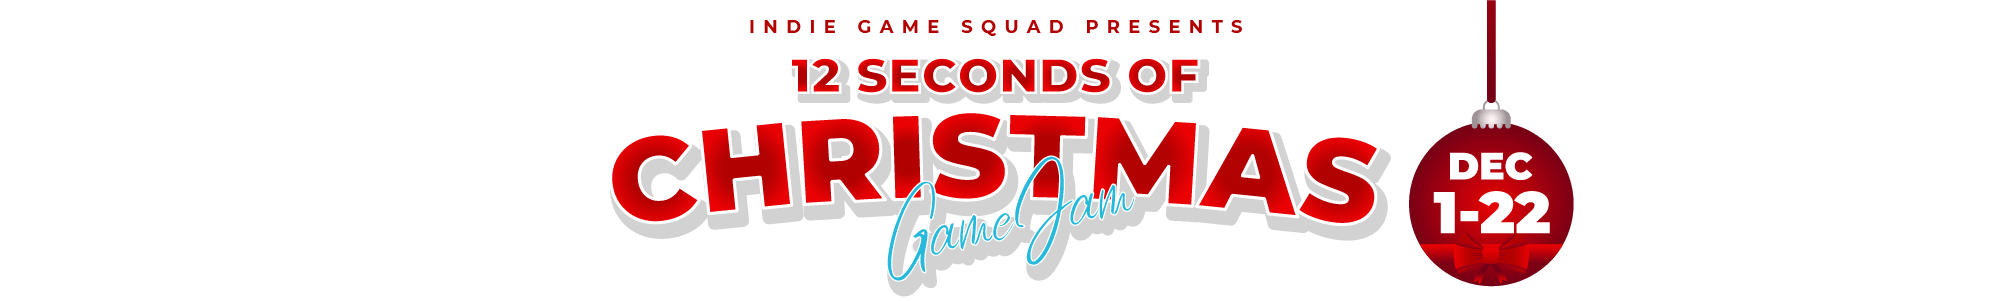 Indie Game Squad Presents 12 Seconds of Christmas Game Jam